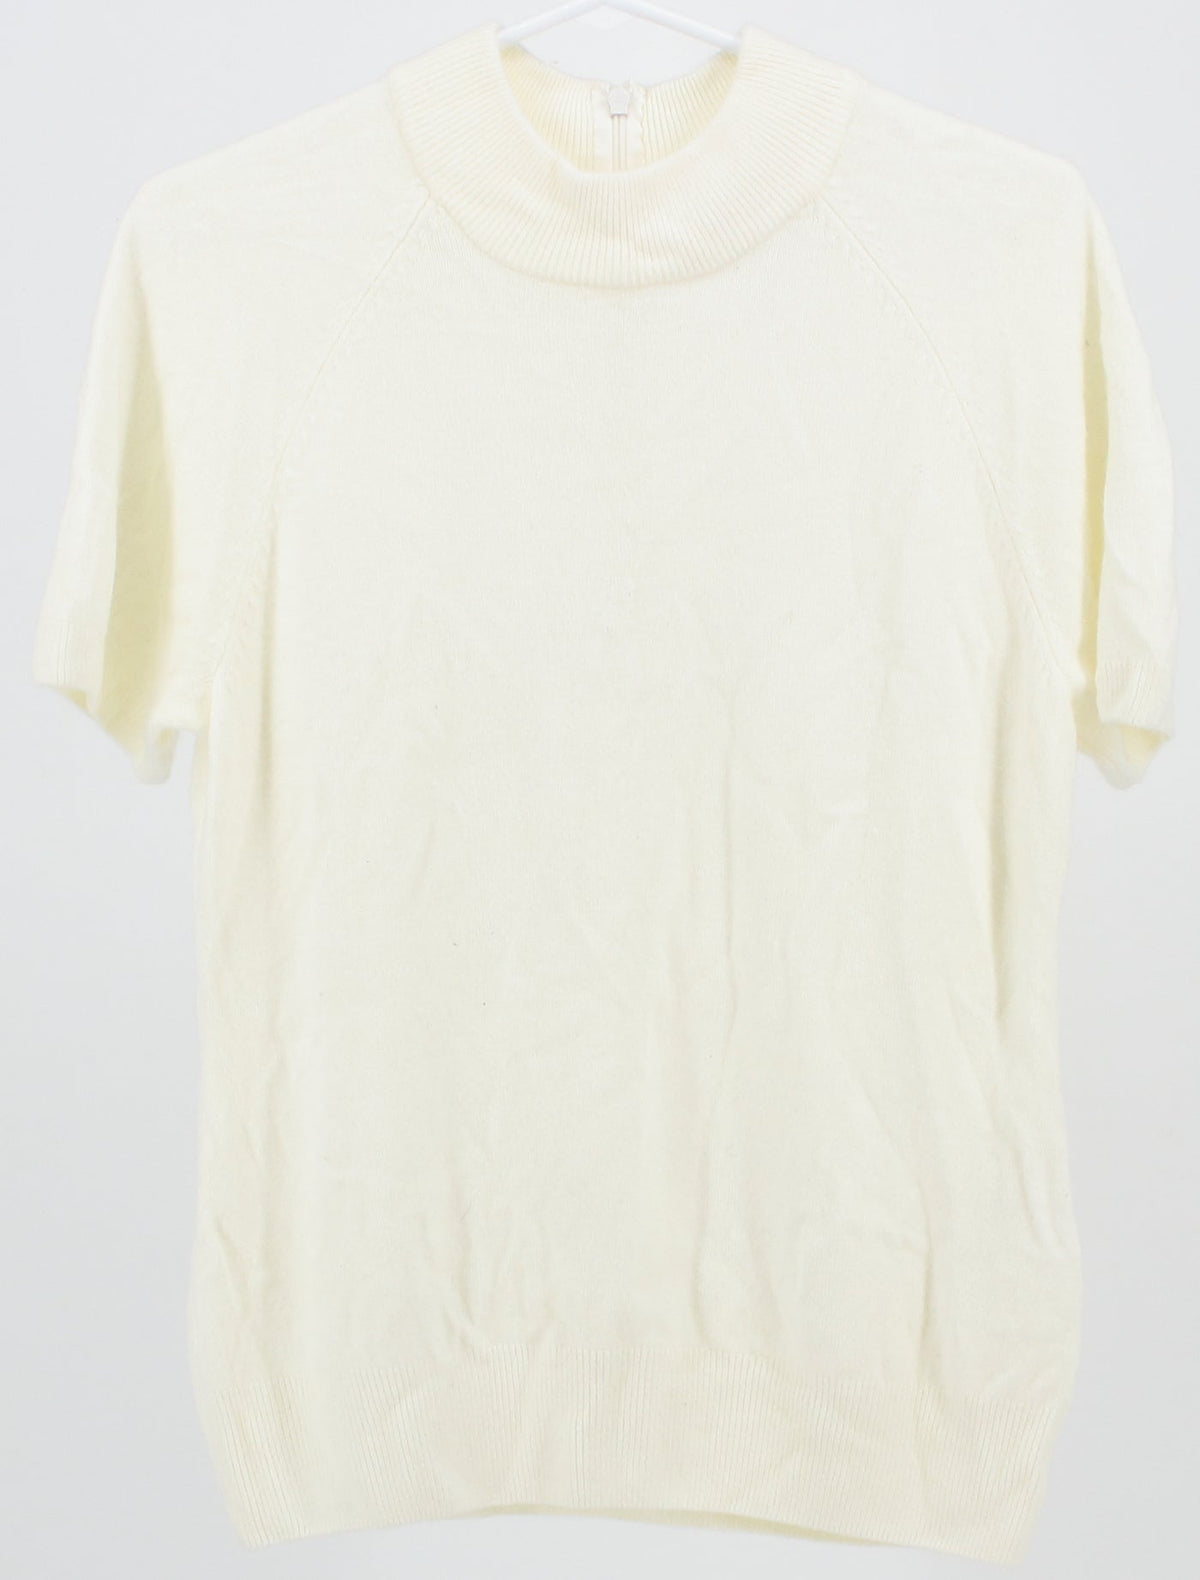 The Tog Shop Off White Short Sleeve Knit Top